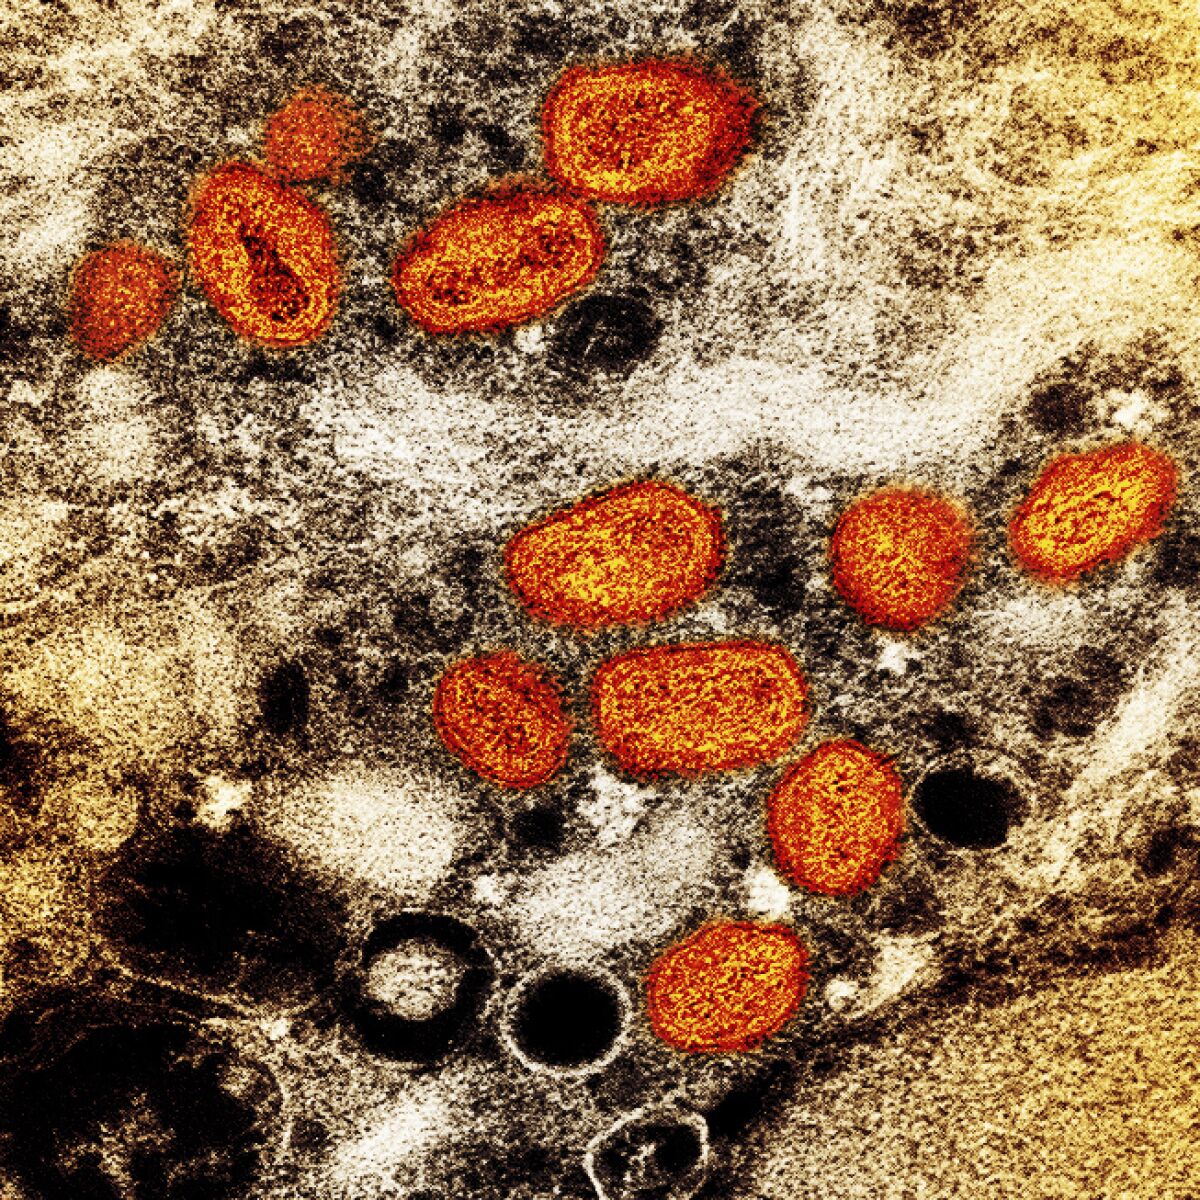 Electron microscope view of monkeypox particles